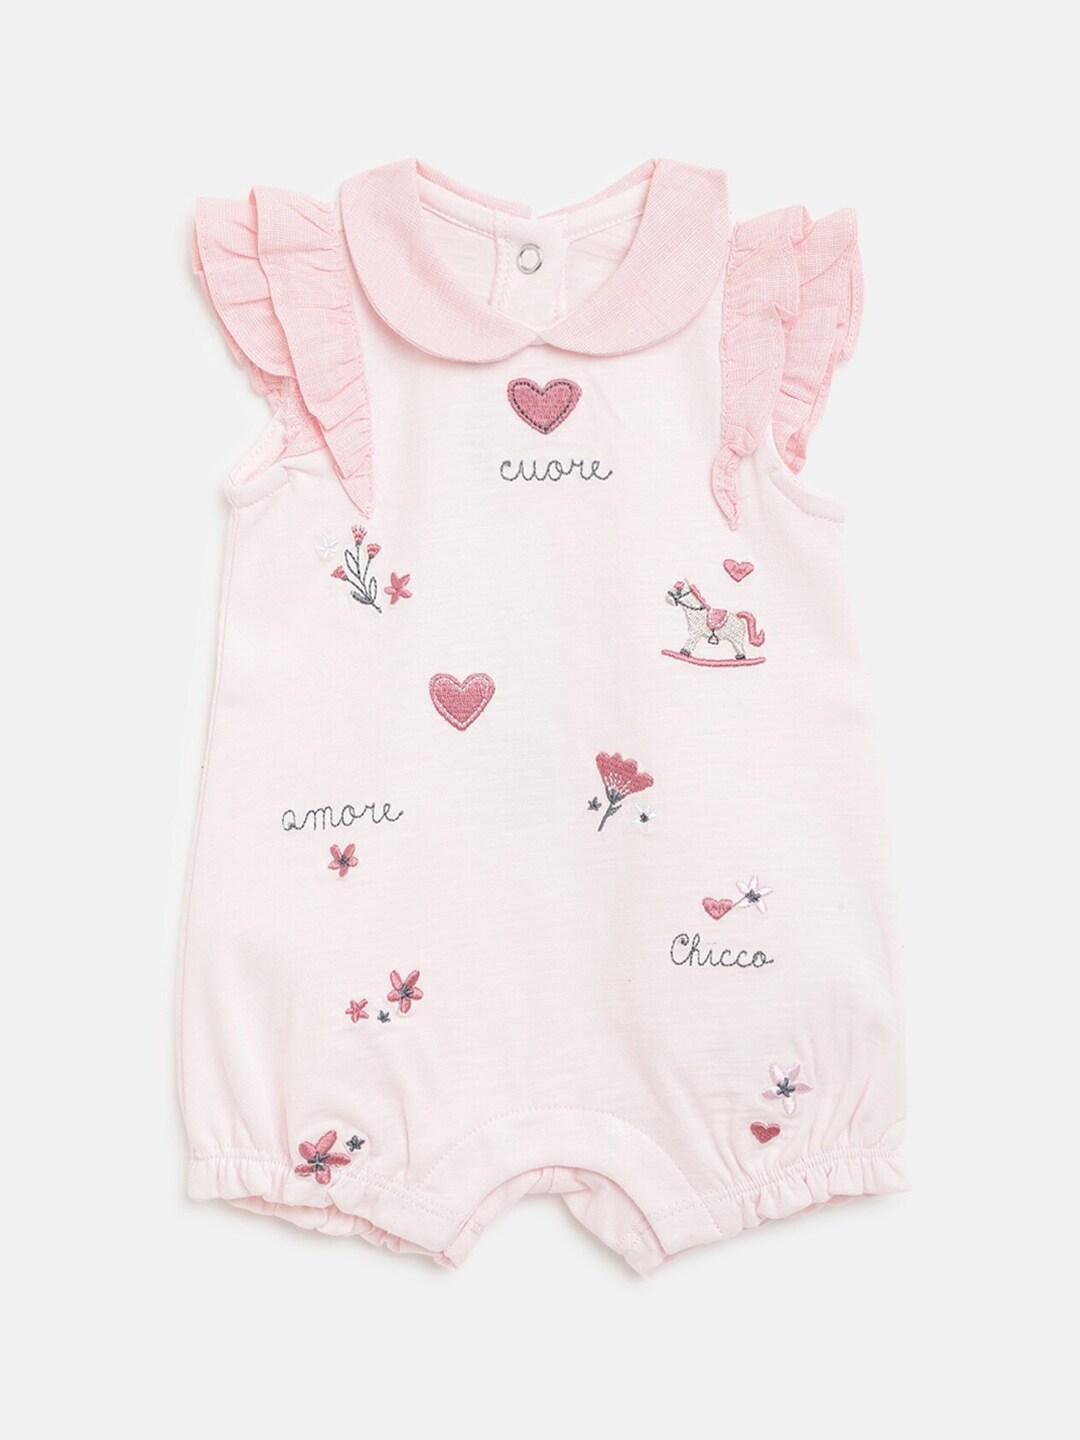 Chicco Infant Girls Pink Printed Cotton Rompers